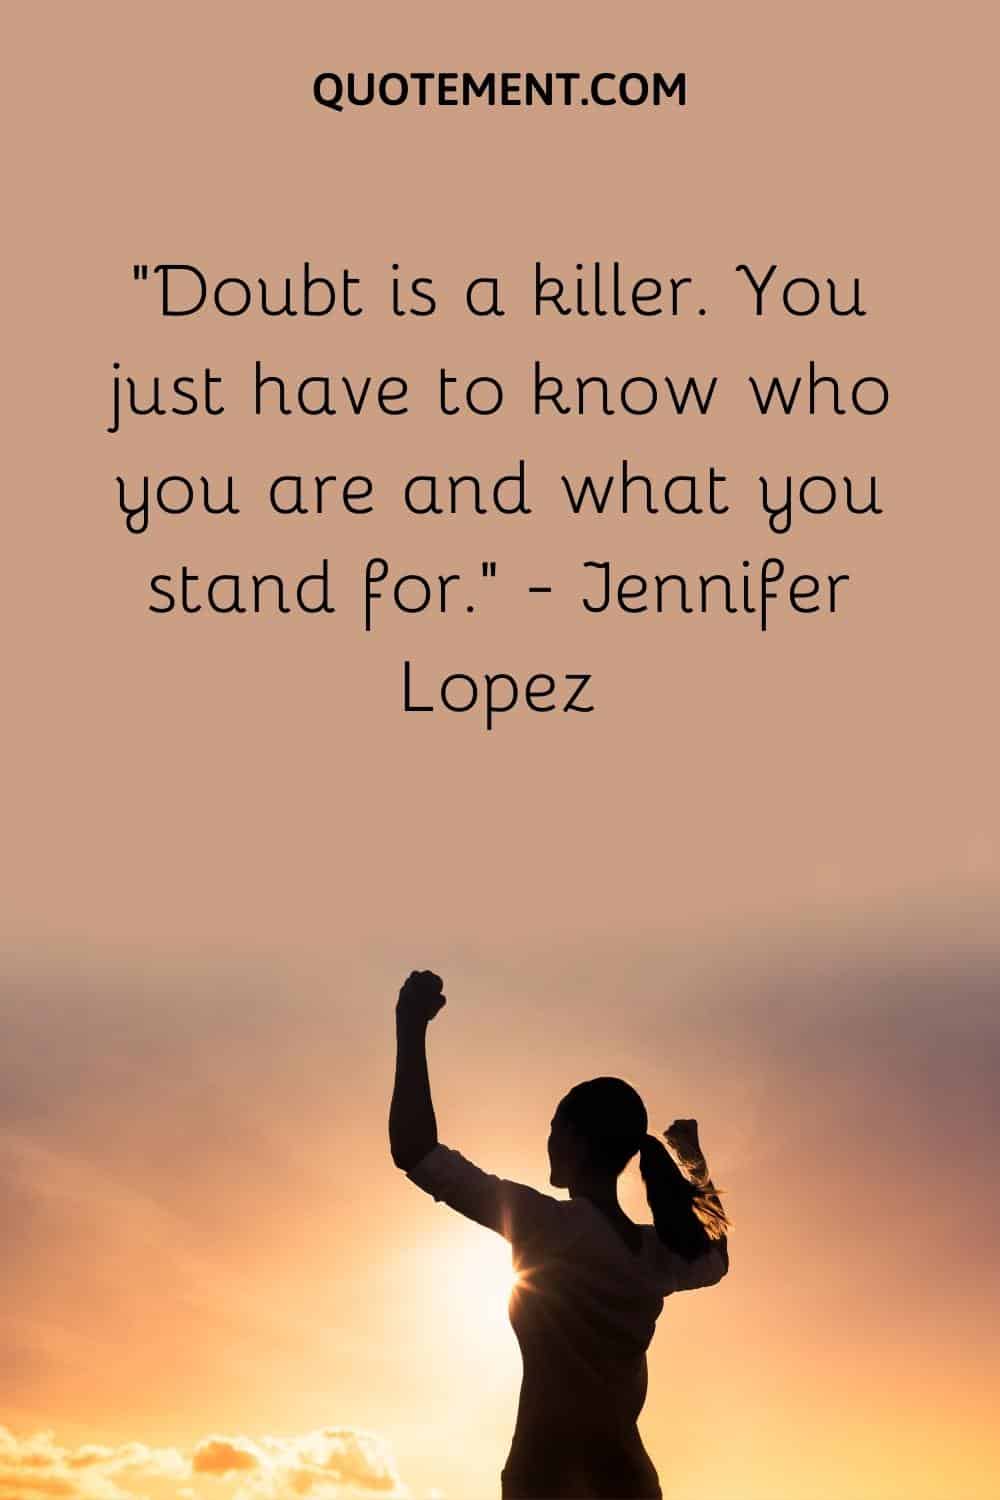 Doubt is a killer. You just have to know who you are and what you stand for